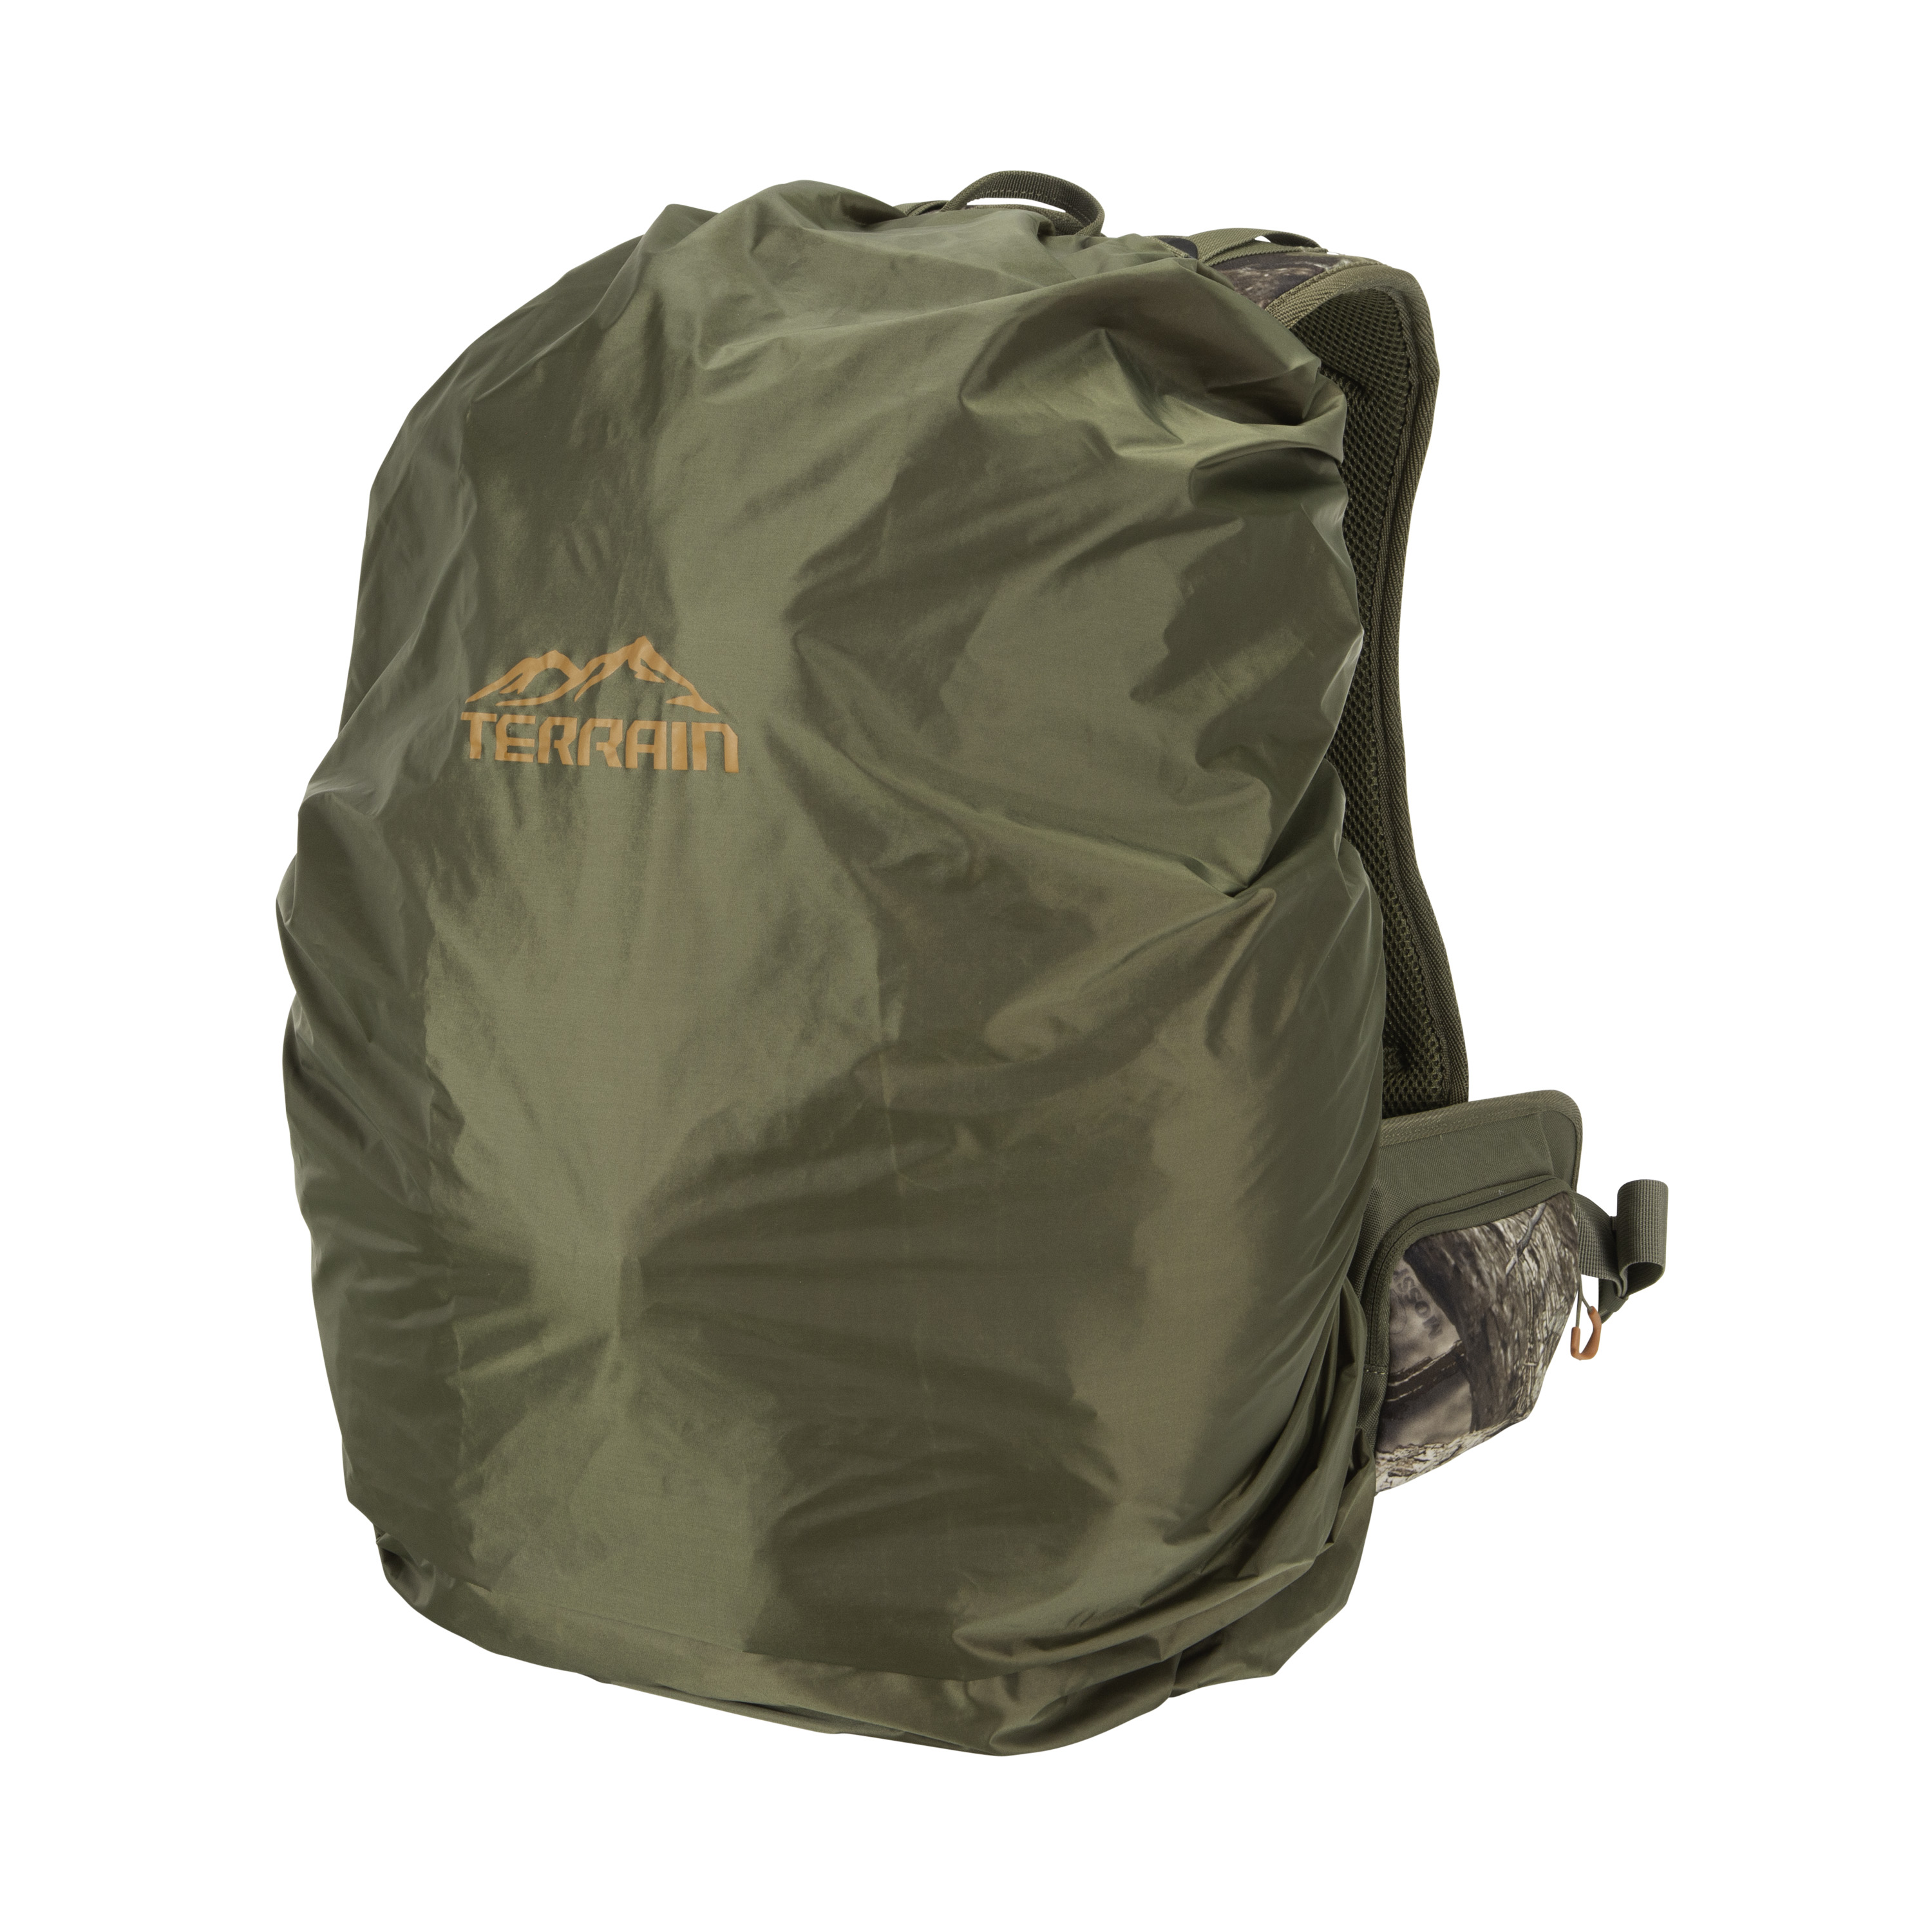 Terrain Knoll Day Pack by Allen in Olive and Mossy Oak Break-Up Country, L, Adjustable & Breathable - image 5 of 12